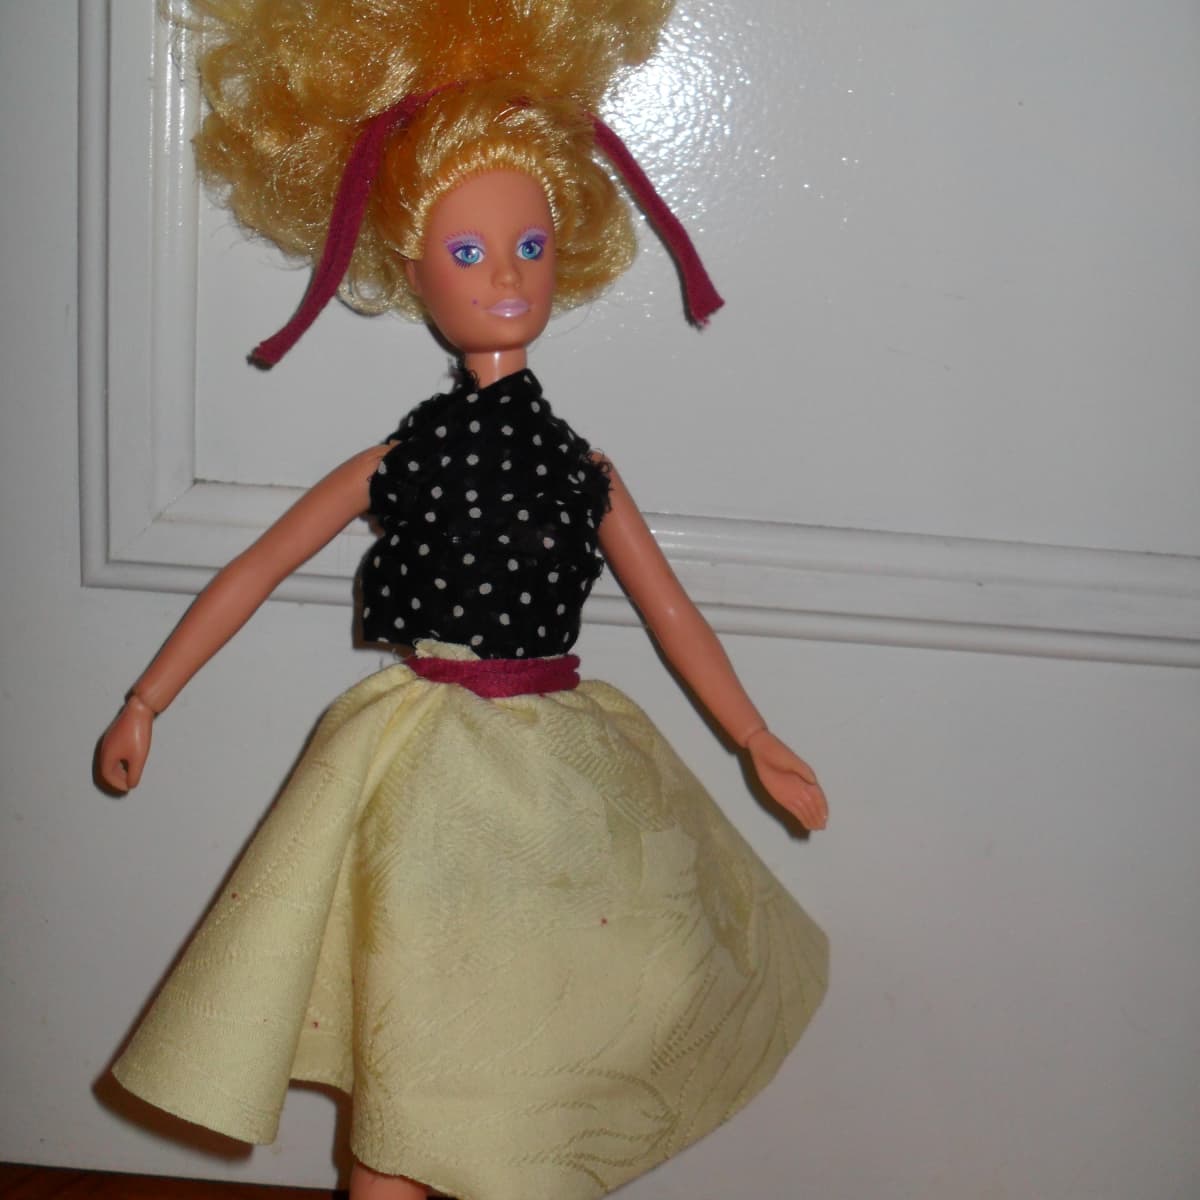 Handmade Barbie Dolls Clothes and Patterns DIY Arts and Crafts